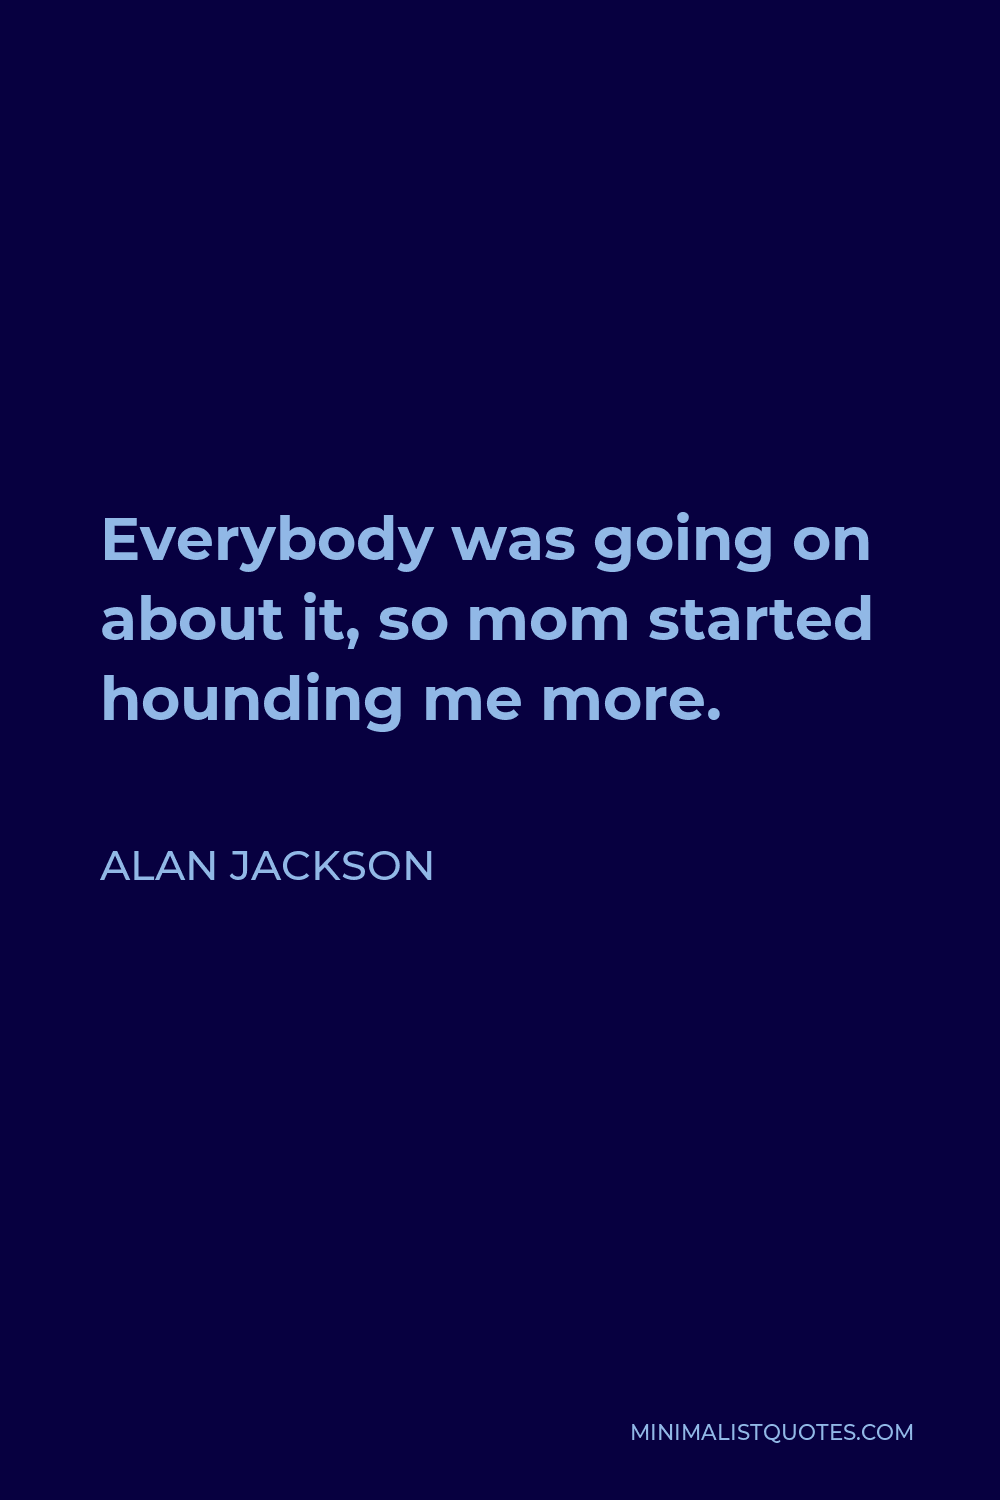 Alan Jackson Quote - Everybody was going on about it, so mom started hounding me more.